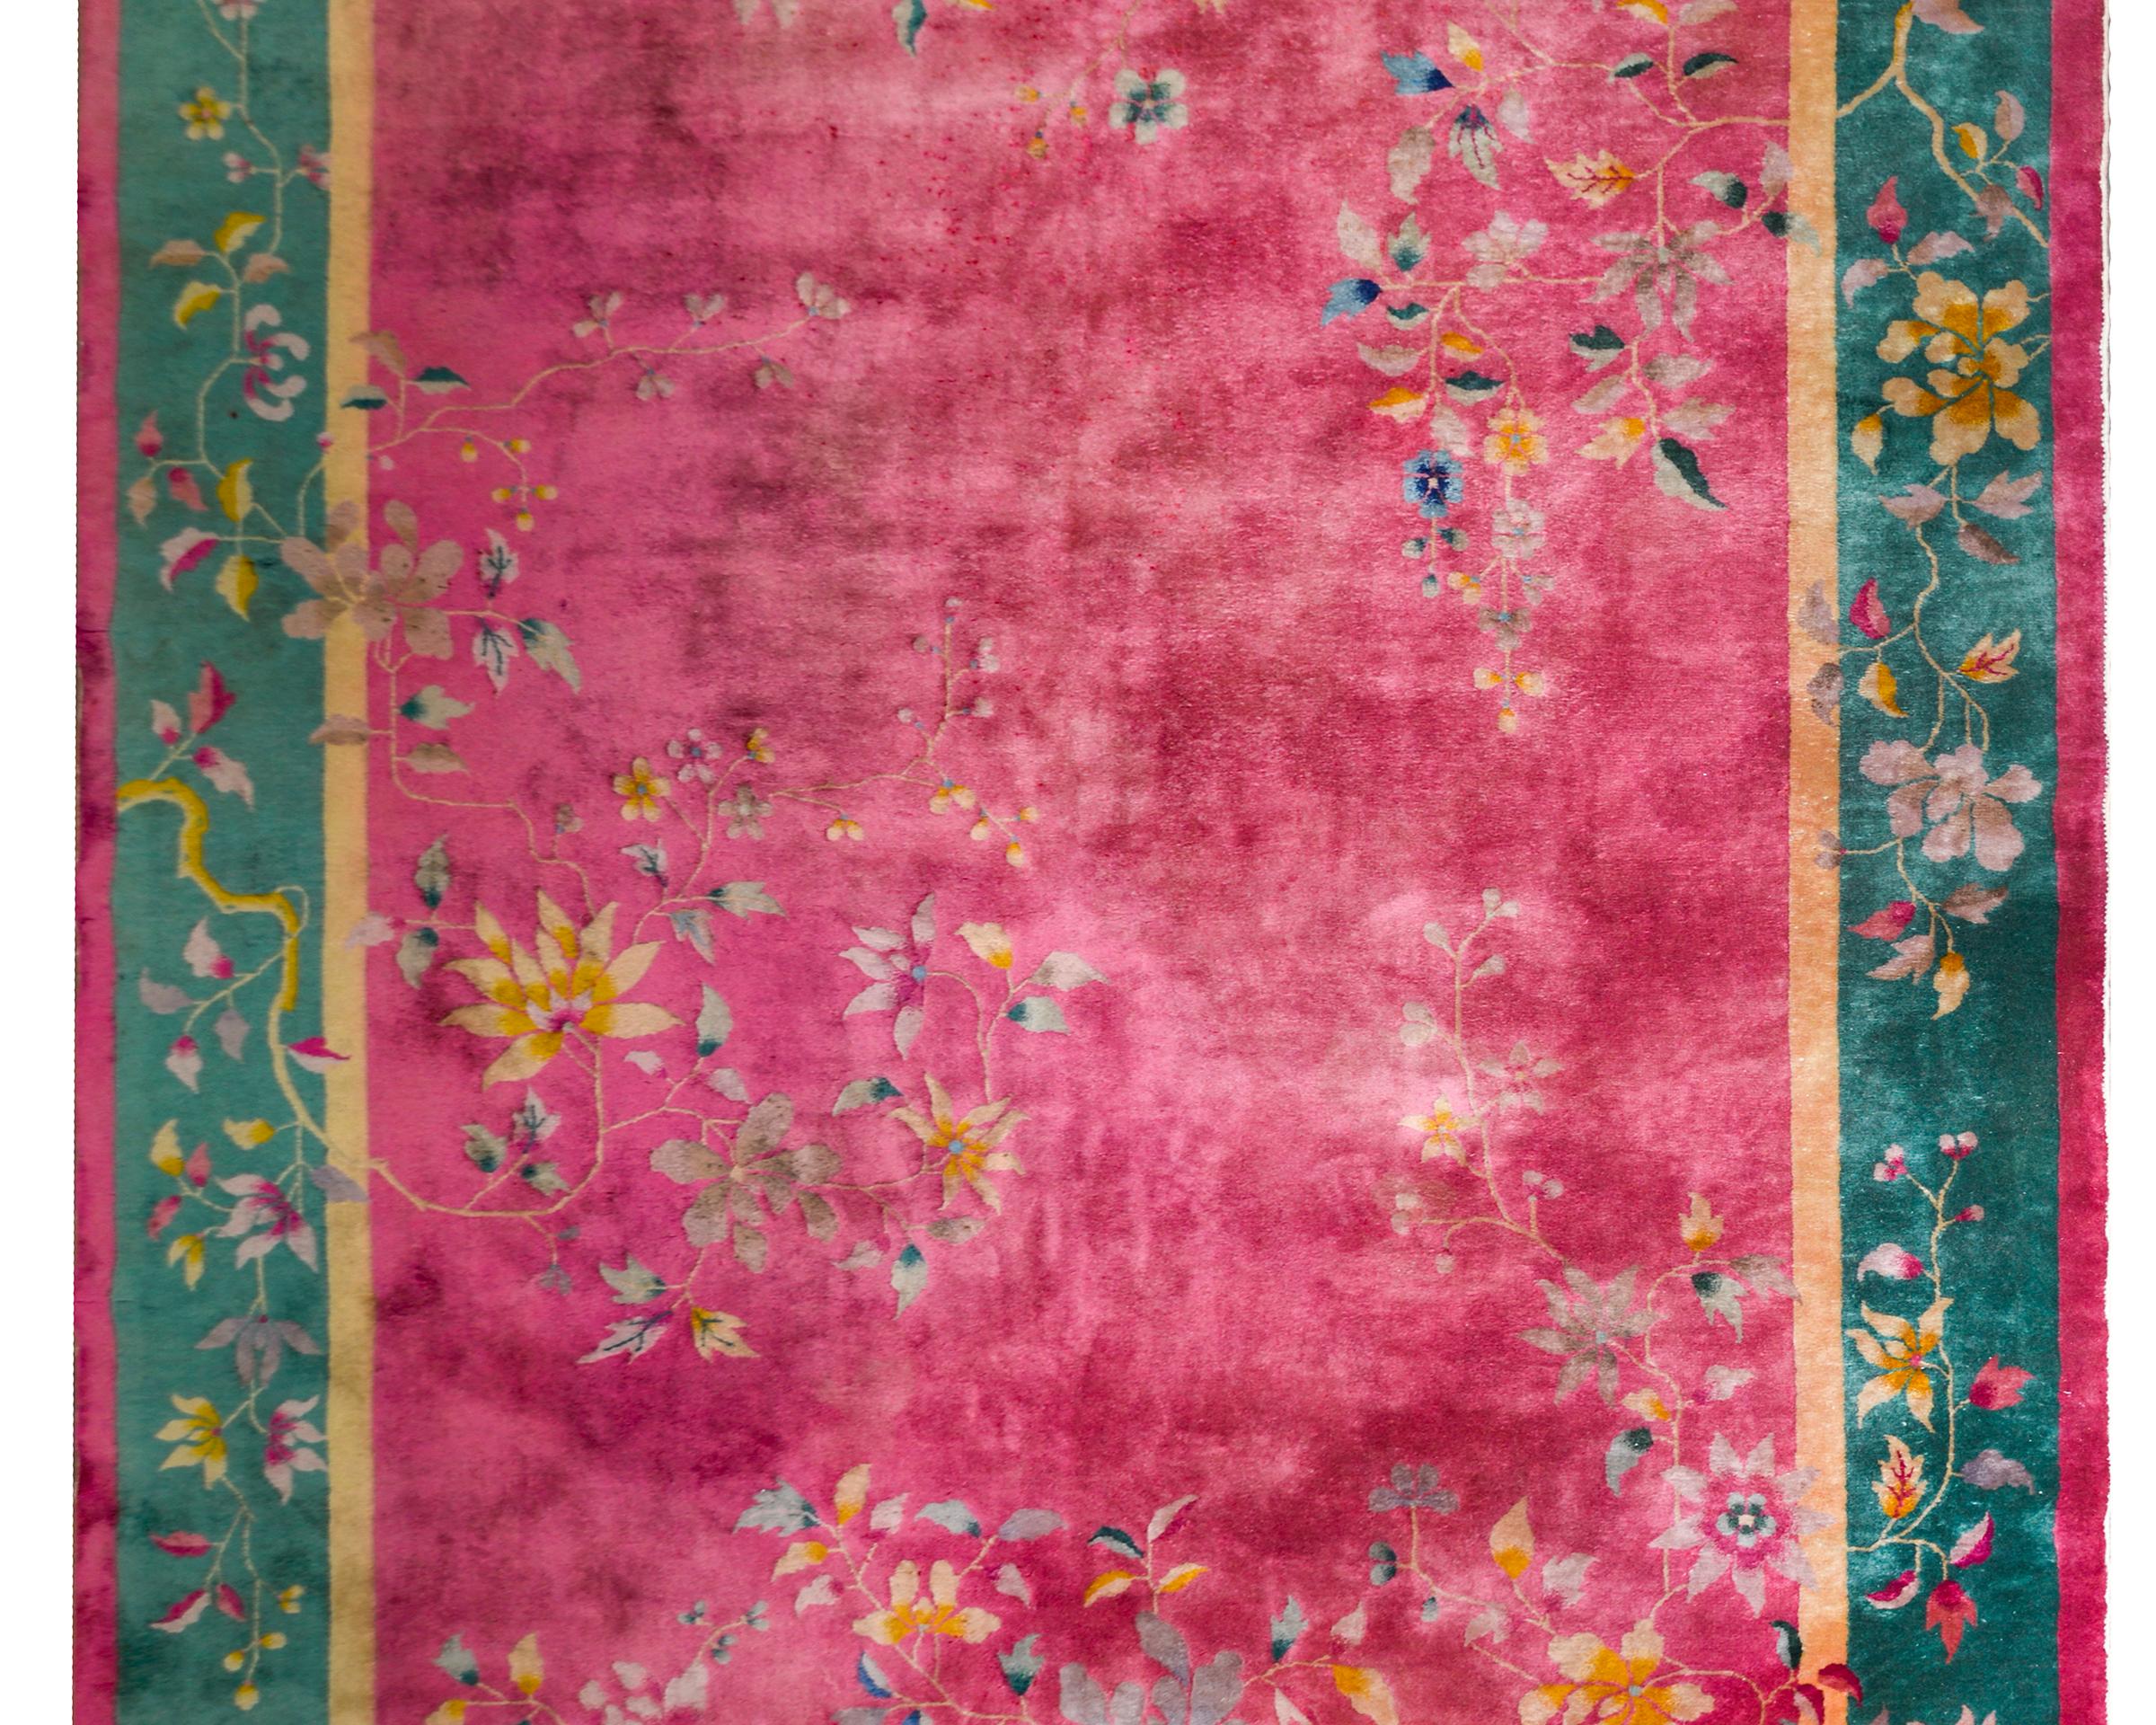 A beautiful early 20th century Chinese Art Deco rug with a brilliant fuchsia field surrounded by a wide turquoise border flanked by narrow gold and fuchsia stripes. Overlaying the border are wonderful large-scale peonies and scrolling vines, all